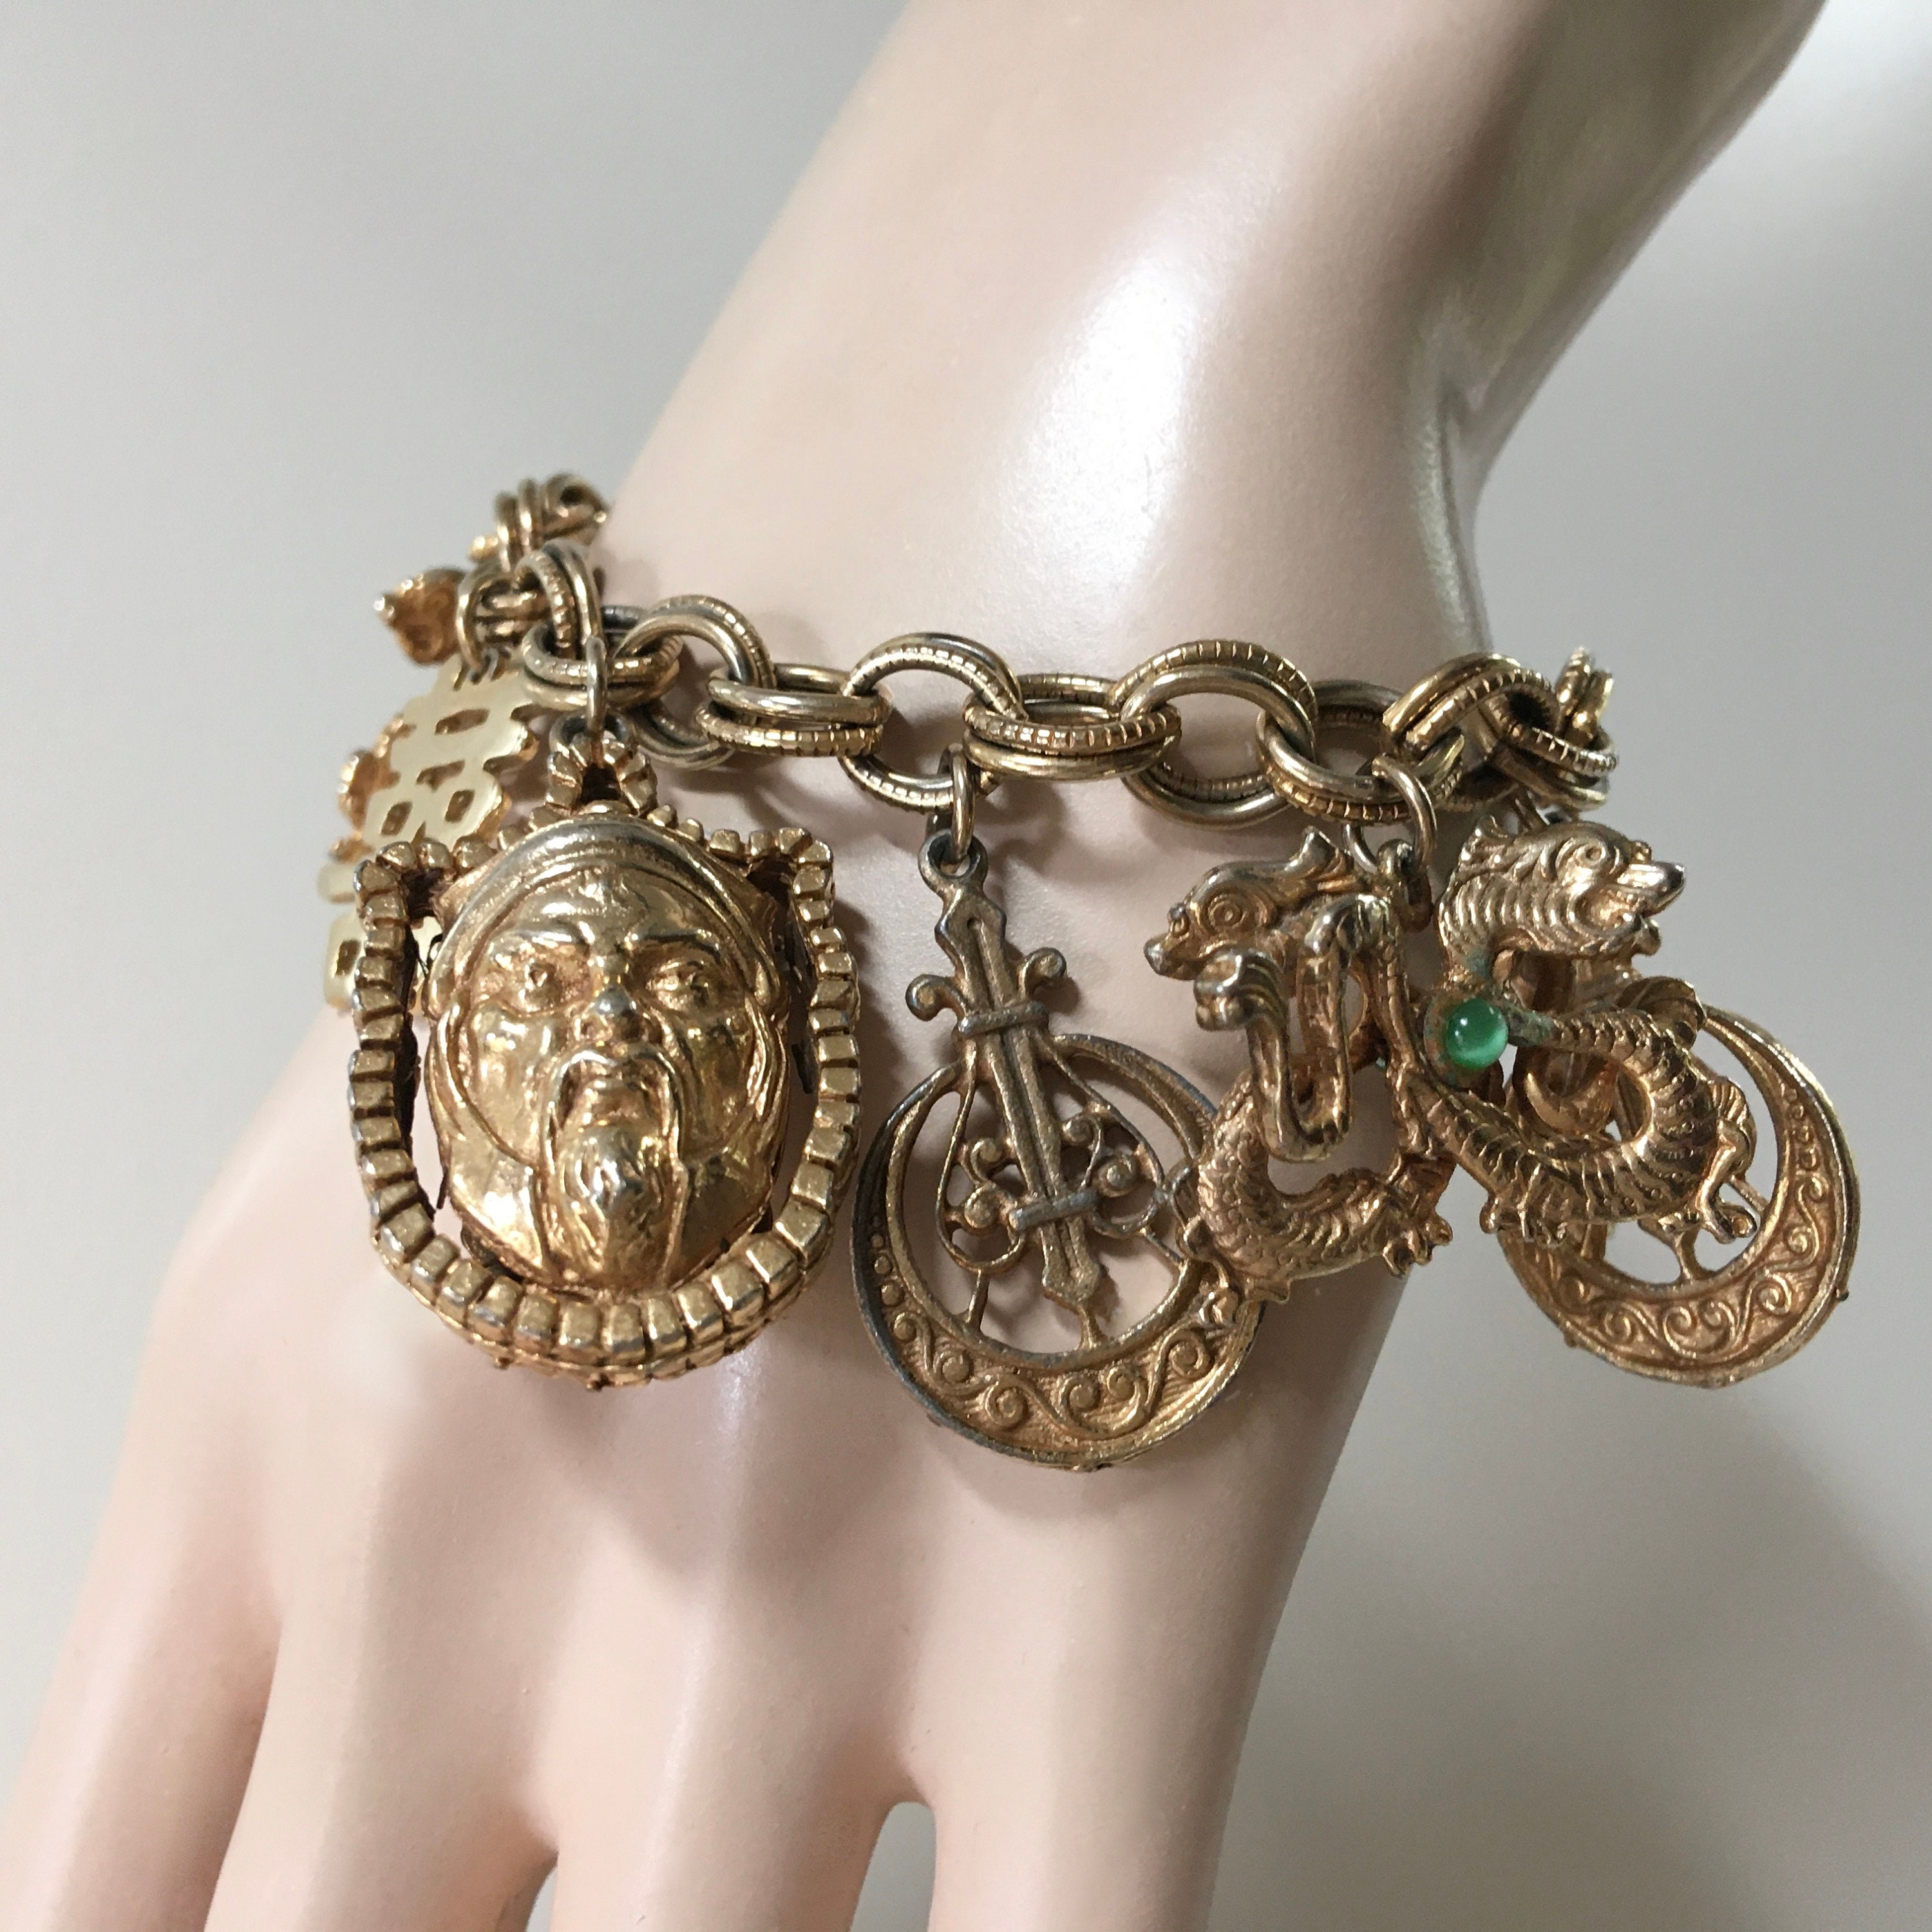 Har Asian Charm Bracelet - Signed Gold Tone - Chinese Characters Pagoda Dragons Face Charms - 1950s